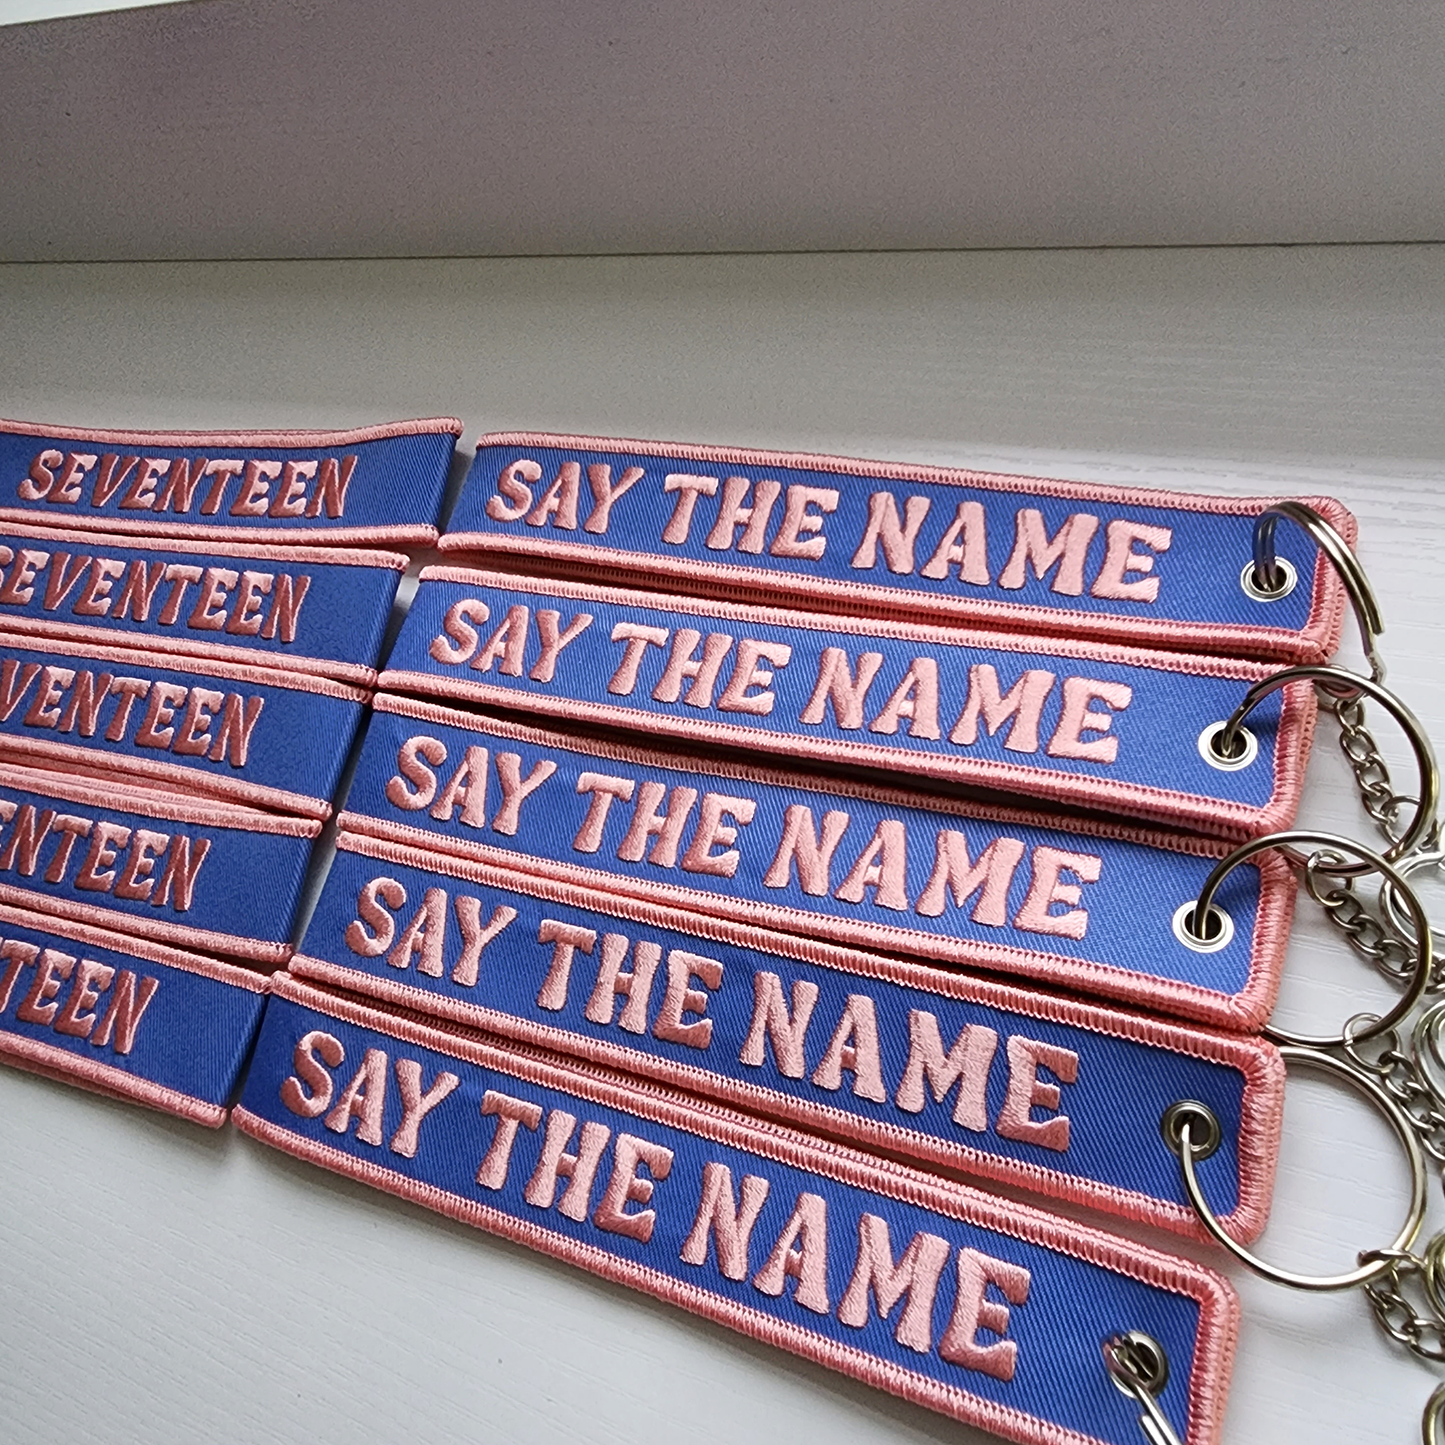 Seventeen - "Say the Name" Embroidered Keychain Wristlet